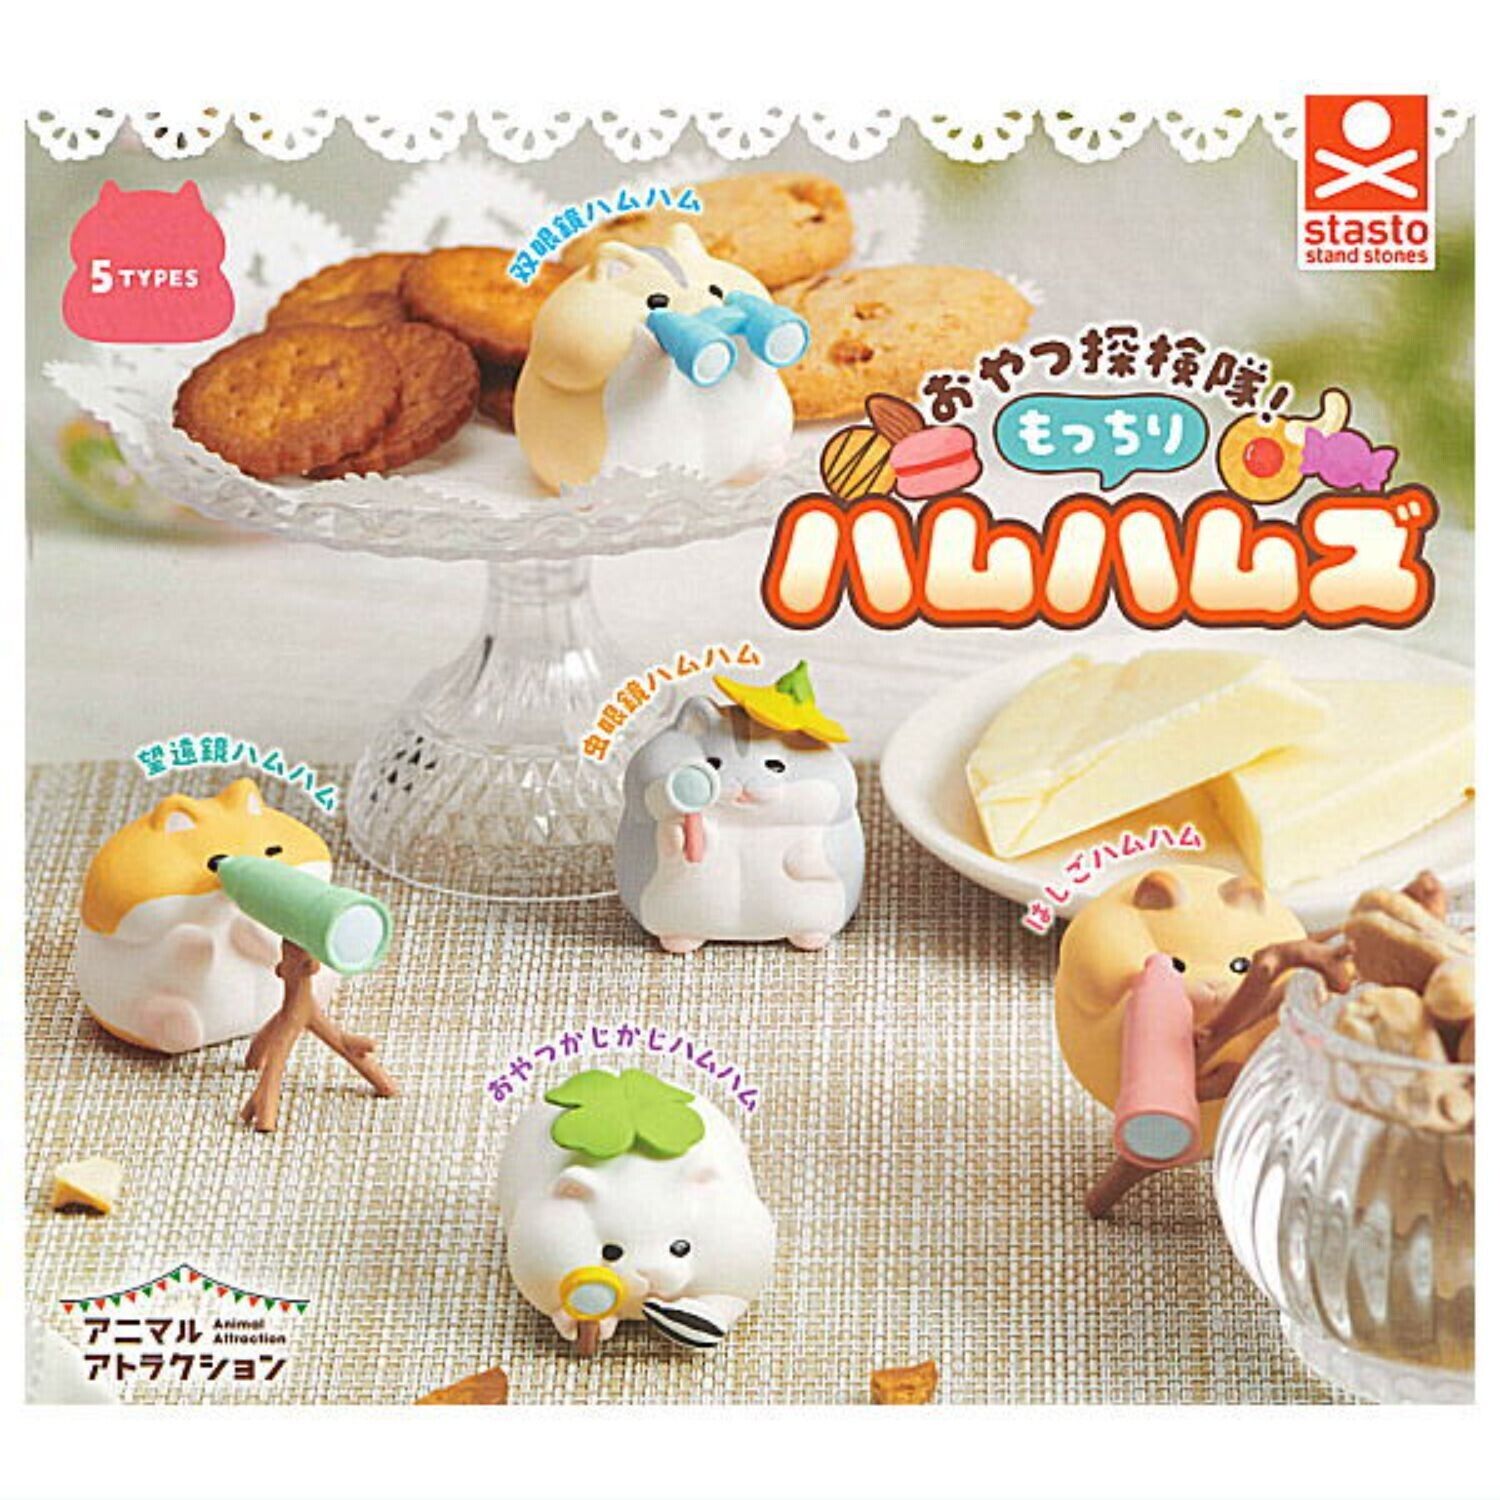 Animal Attraction Hamster Mascot Capsule Toy 5 Types Full Comp Set Gacha New